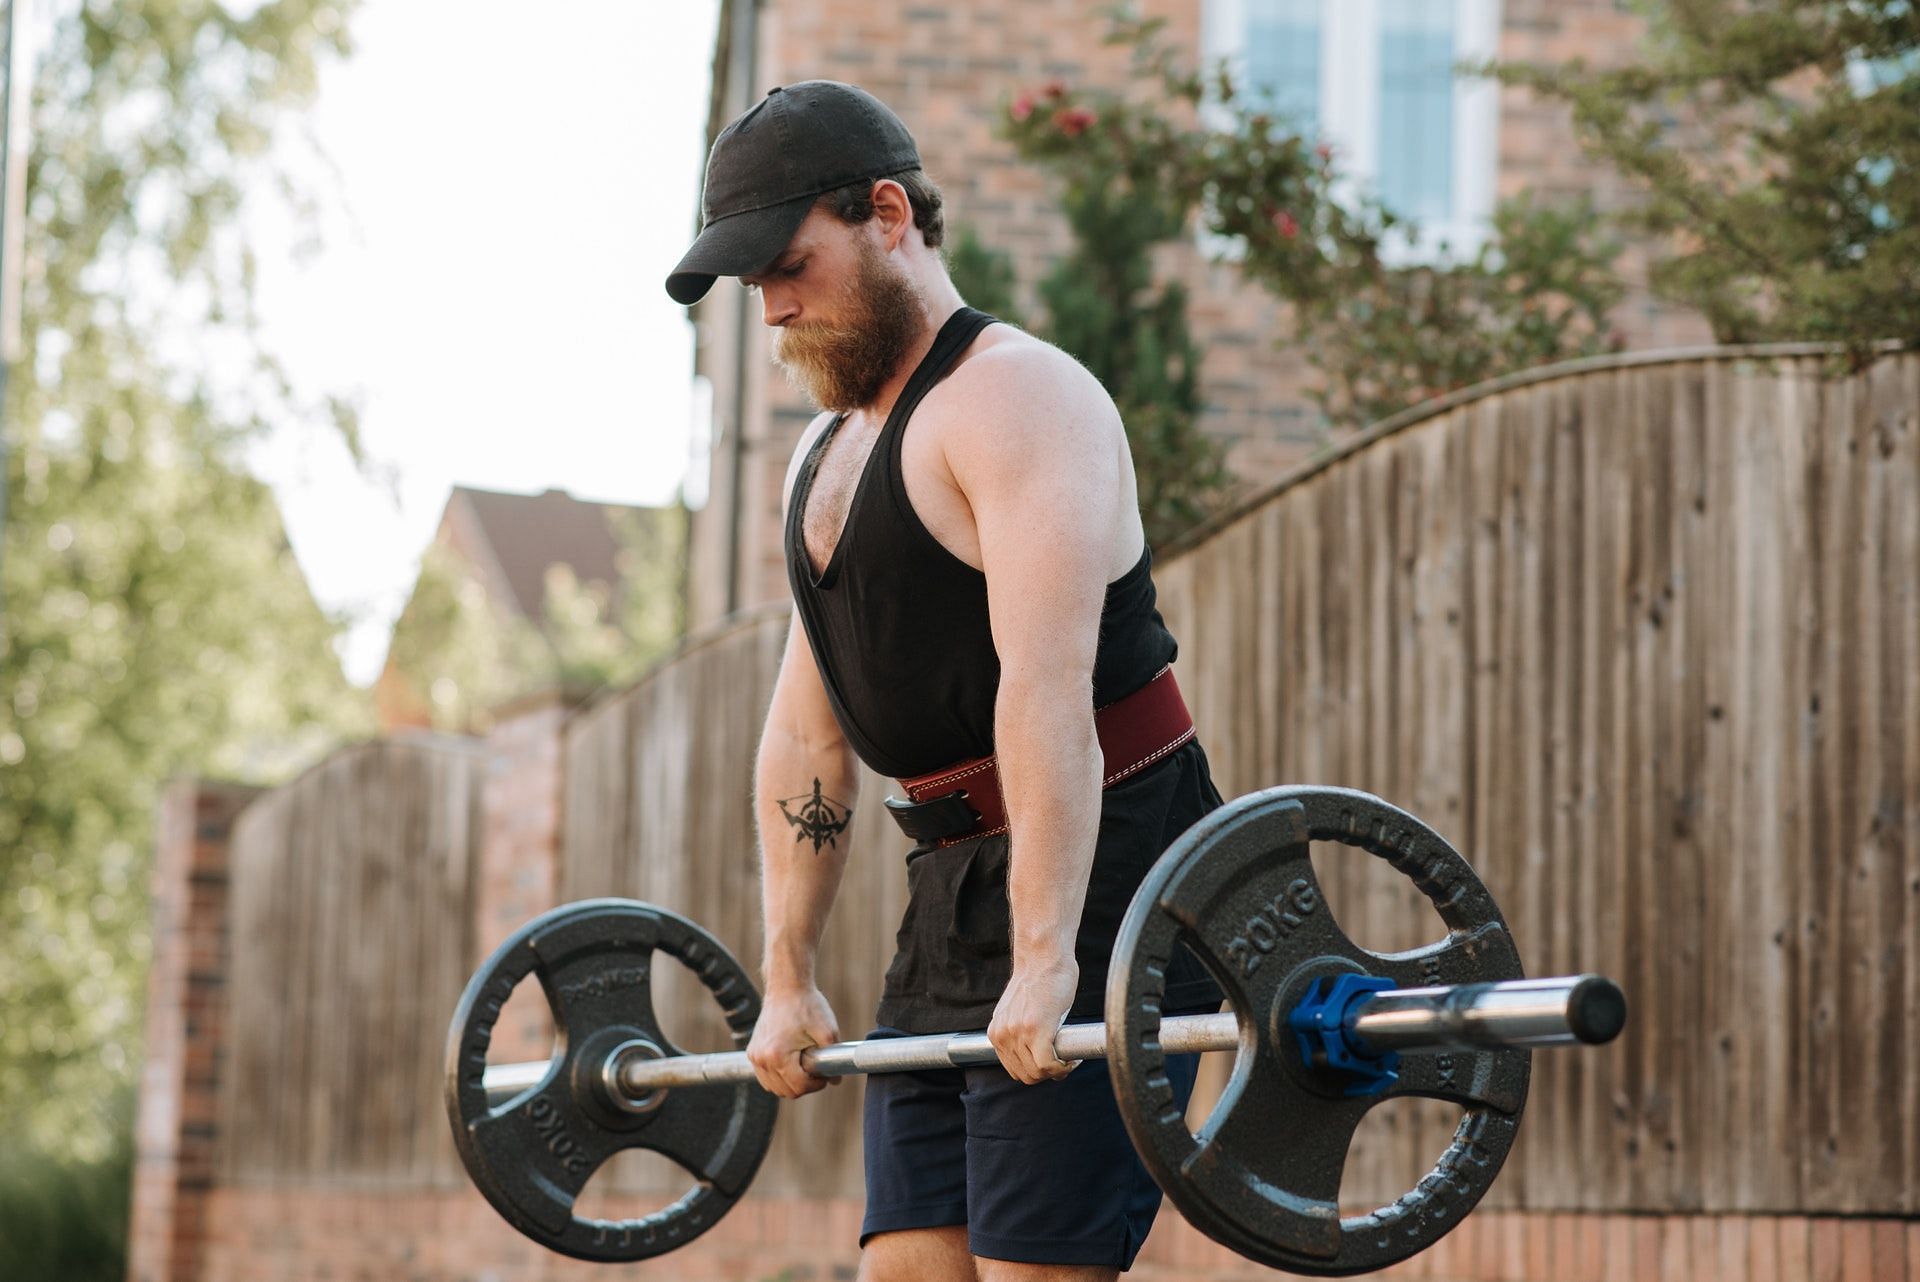 Dead-lift is a dangerous exercise that can hurt your back. (Photo by Anete Lusina via pexels)